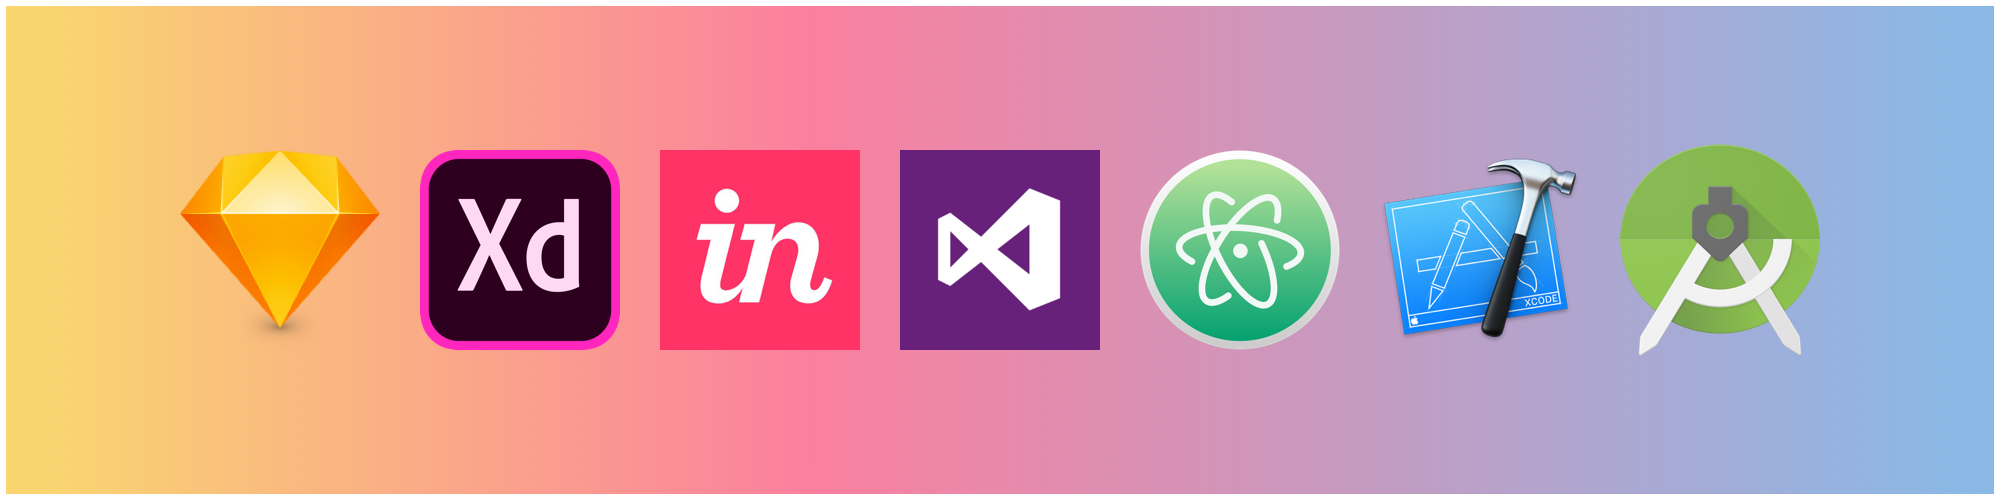 Tools for Designers and Developers